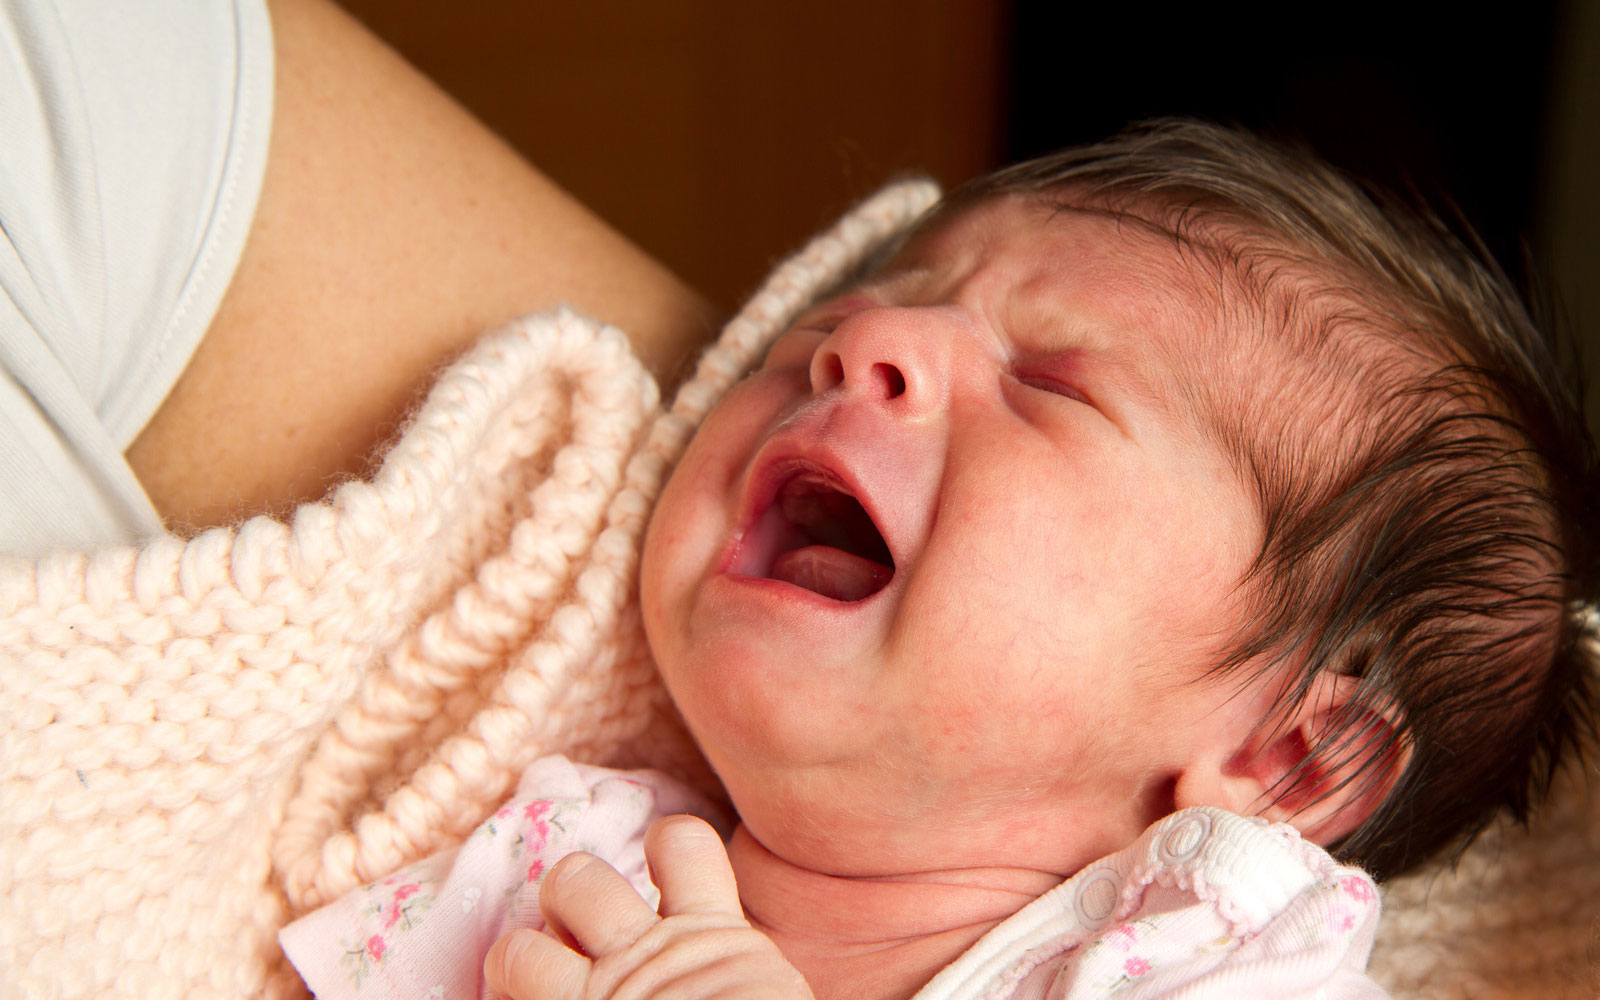 How do I know if my baby has colic?